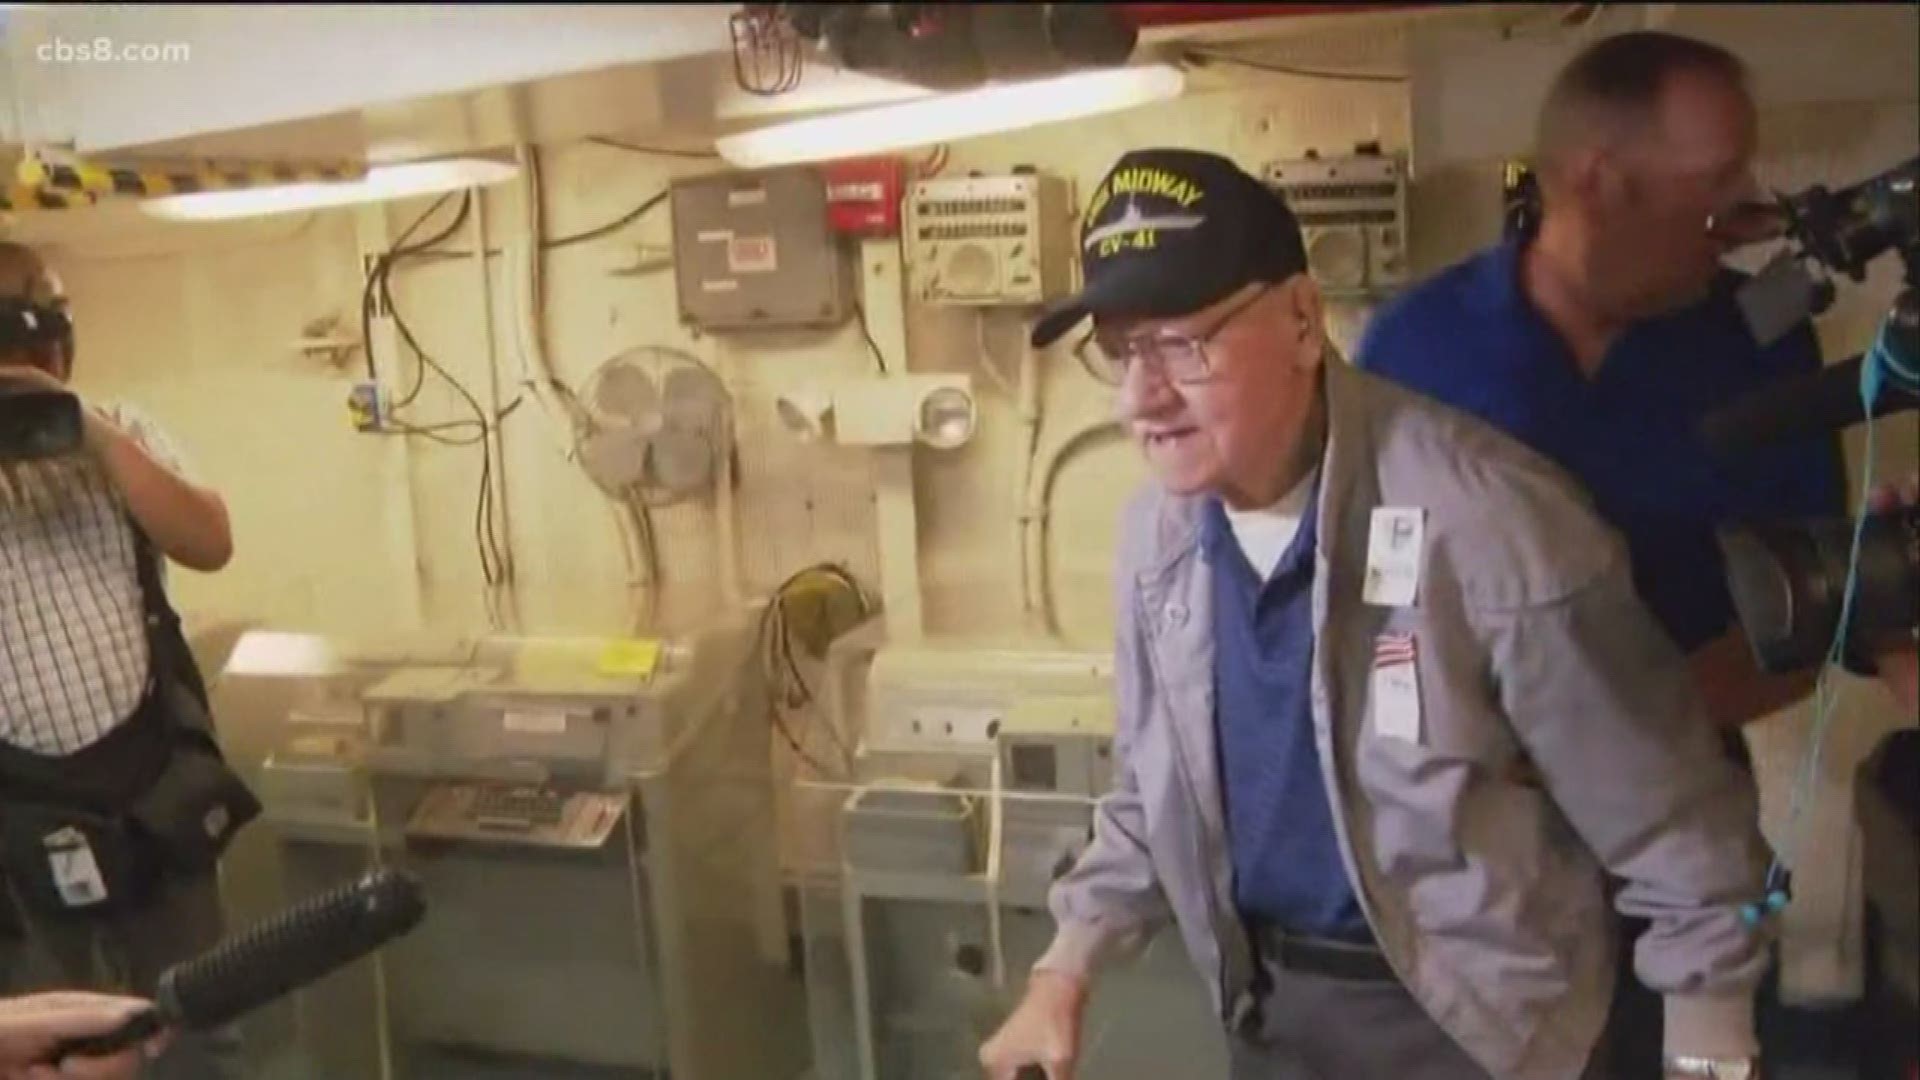 Ed Stankowski returned to the USS Midway after serving on it over 70 years ago